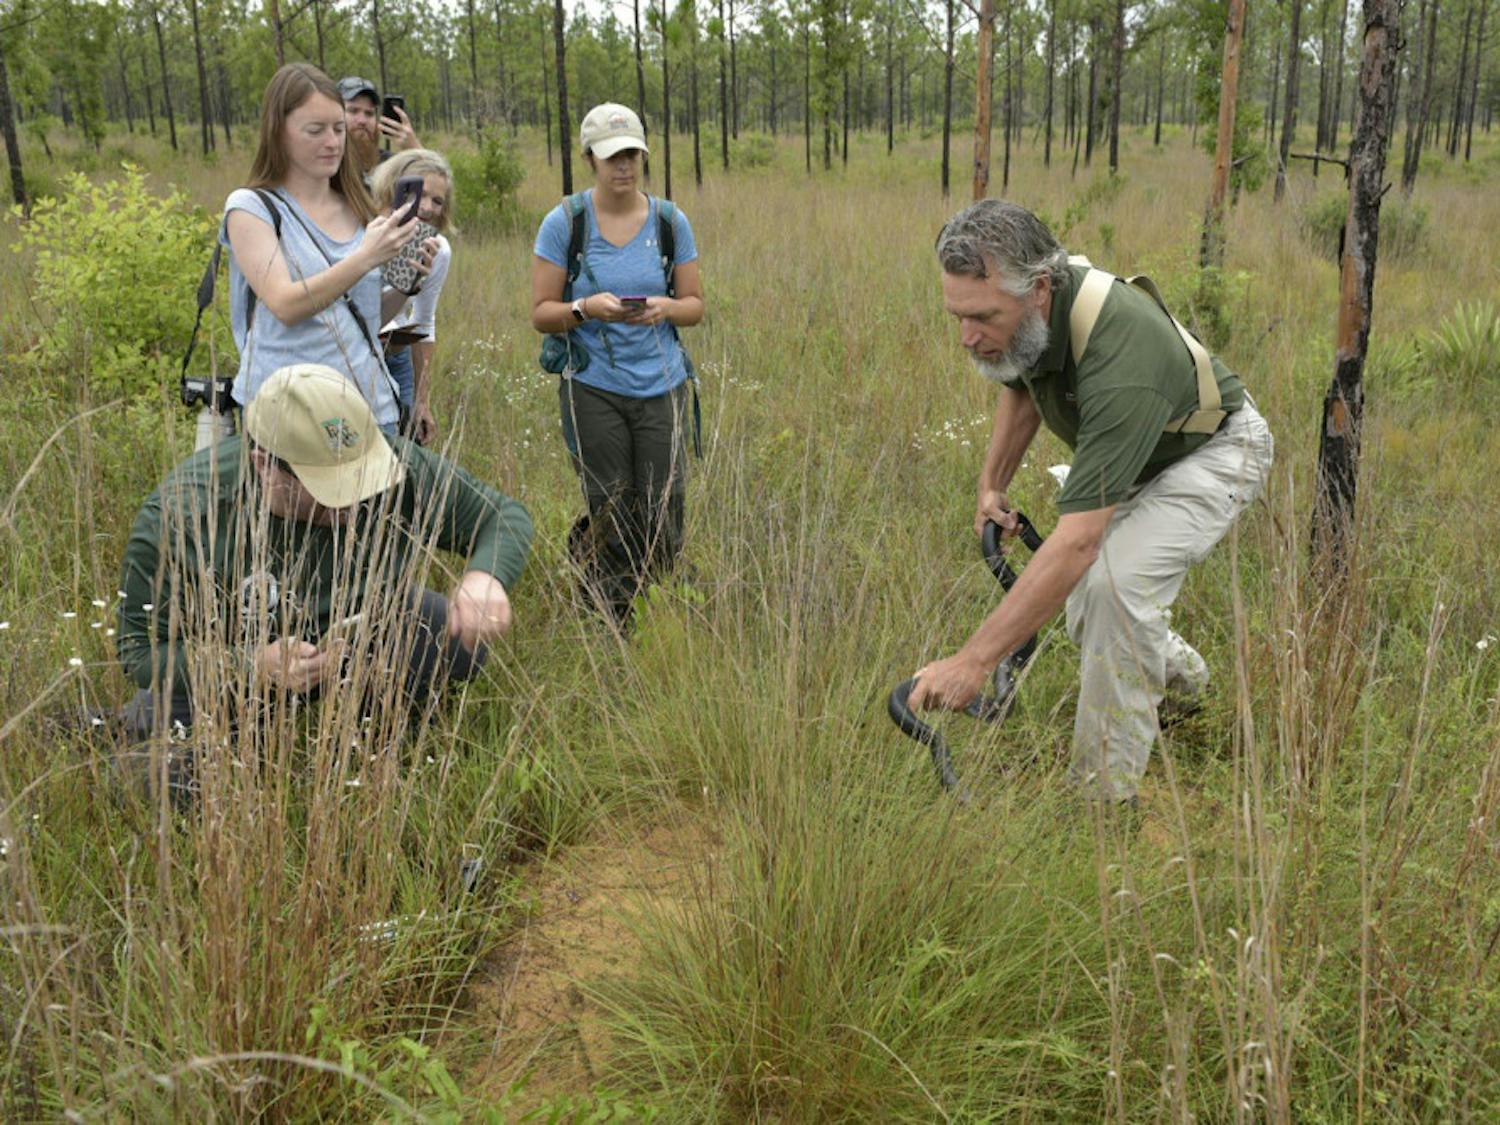 David Printiss releasing an eastern indigo snake at the entrance of a gopher tortoise burrow, where these snakes take shelter from the heat of the summer.